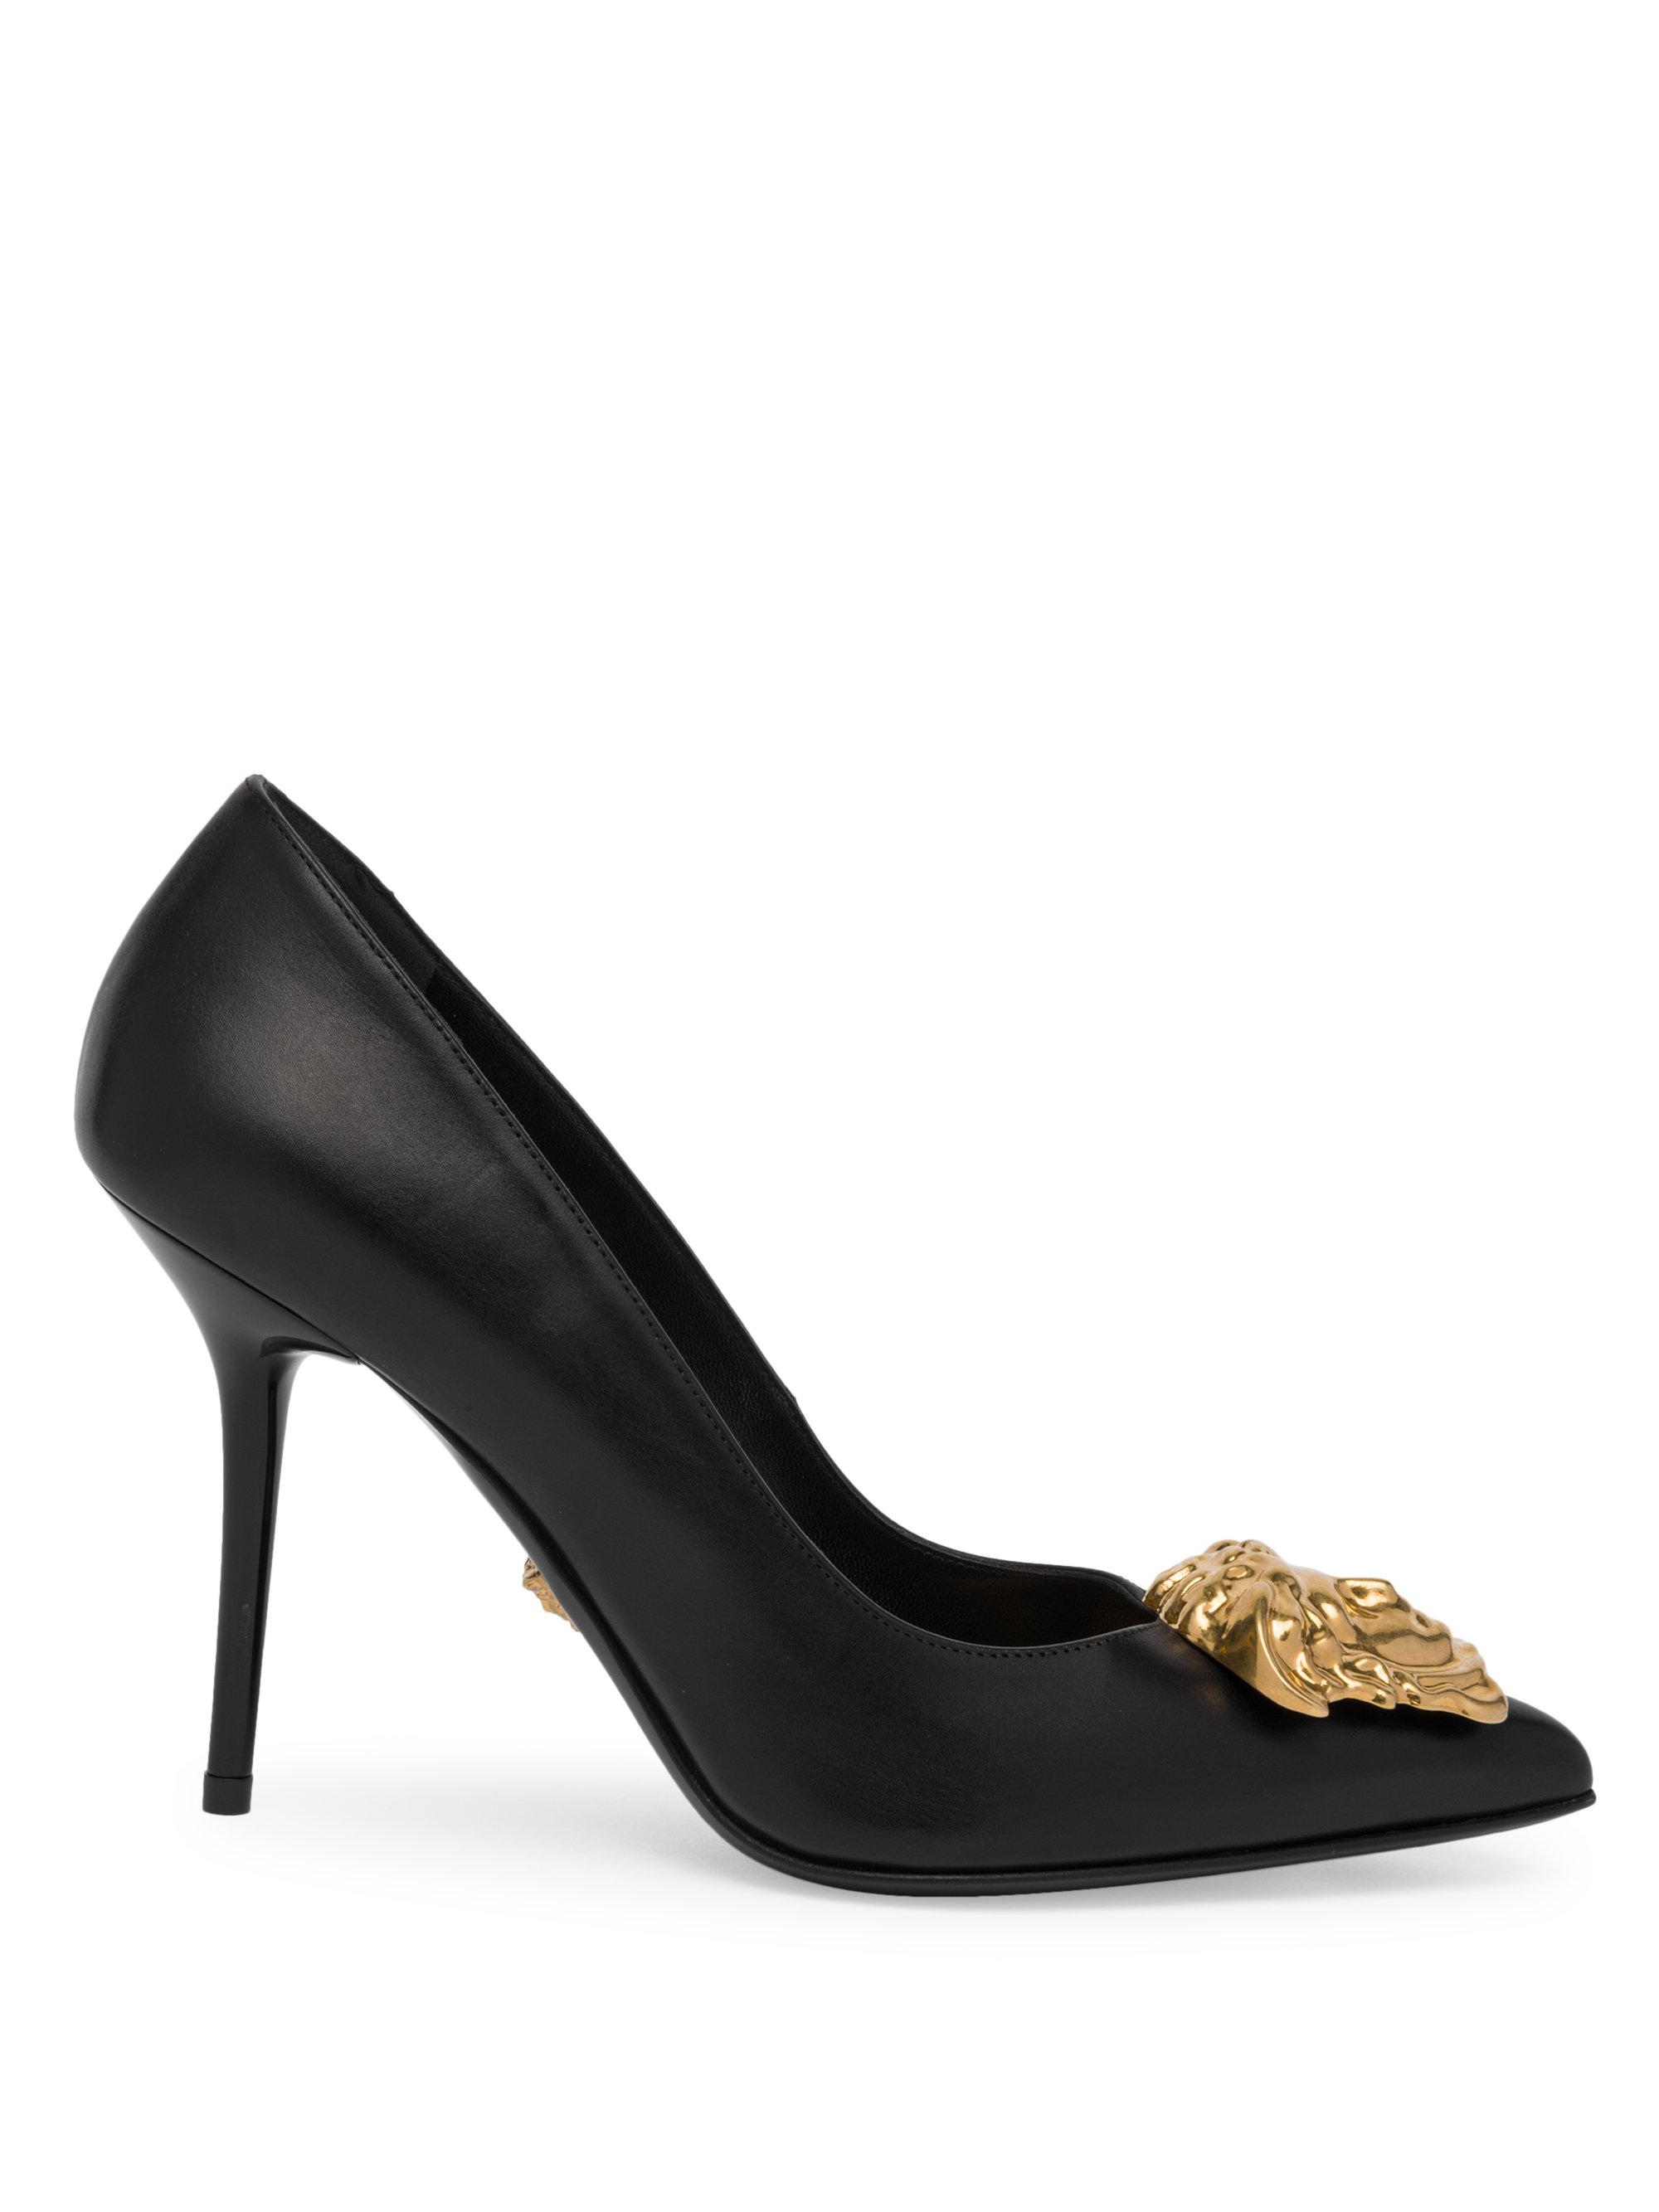 Versace Leather Gold Medusa Palazo Tribute Pumps in Black - Lyst